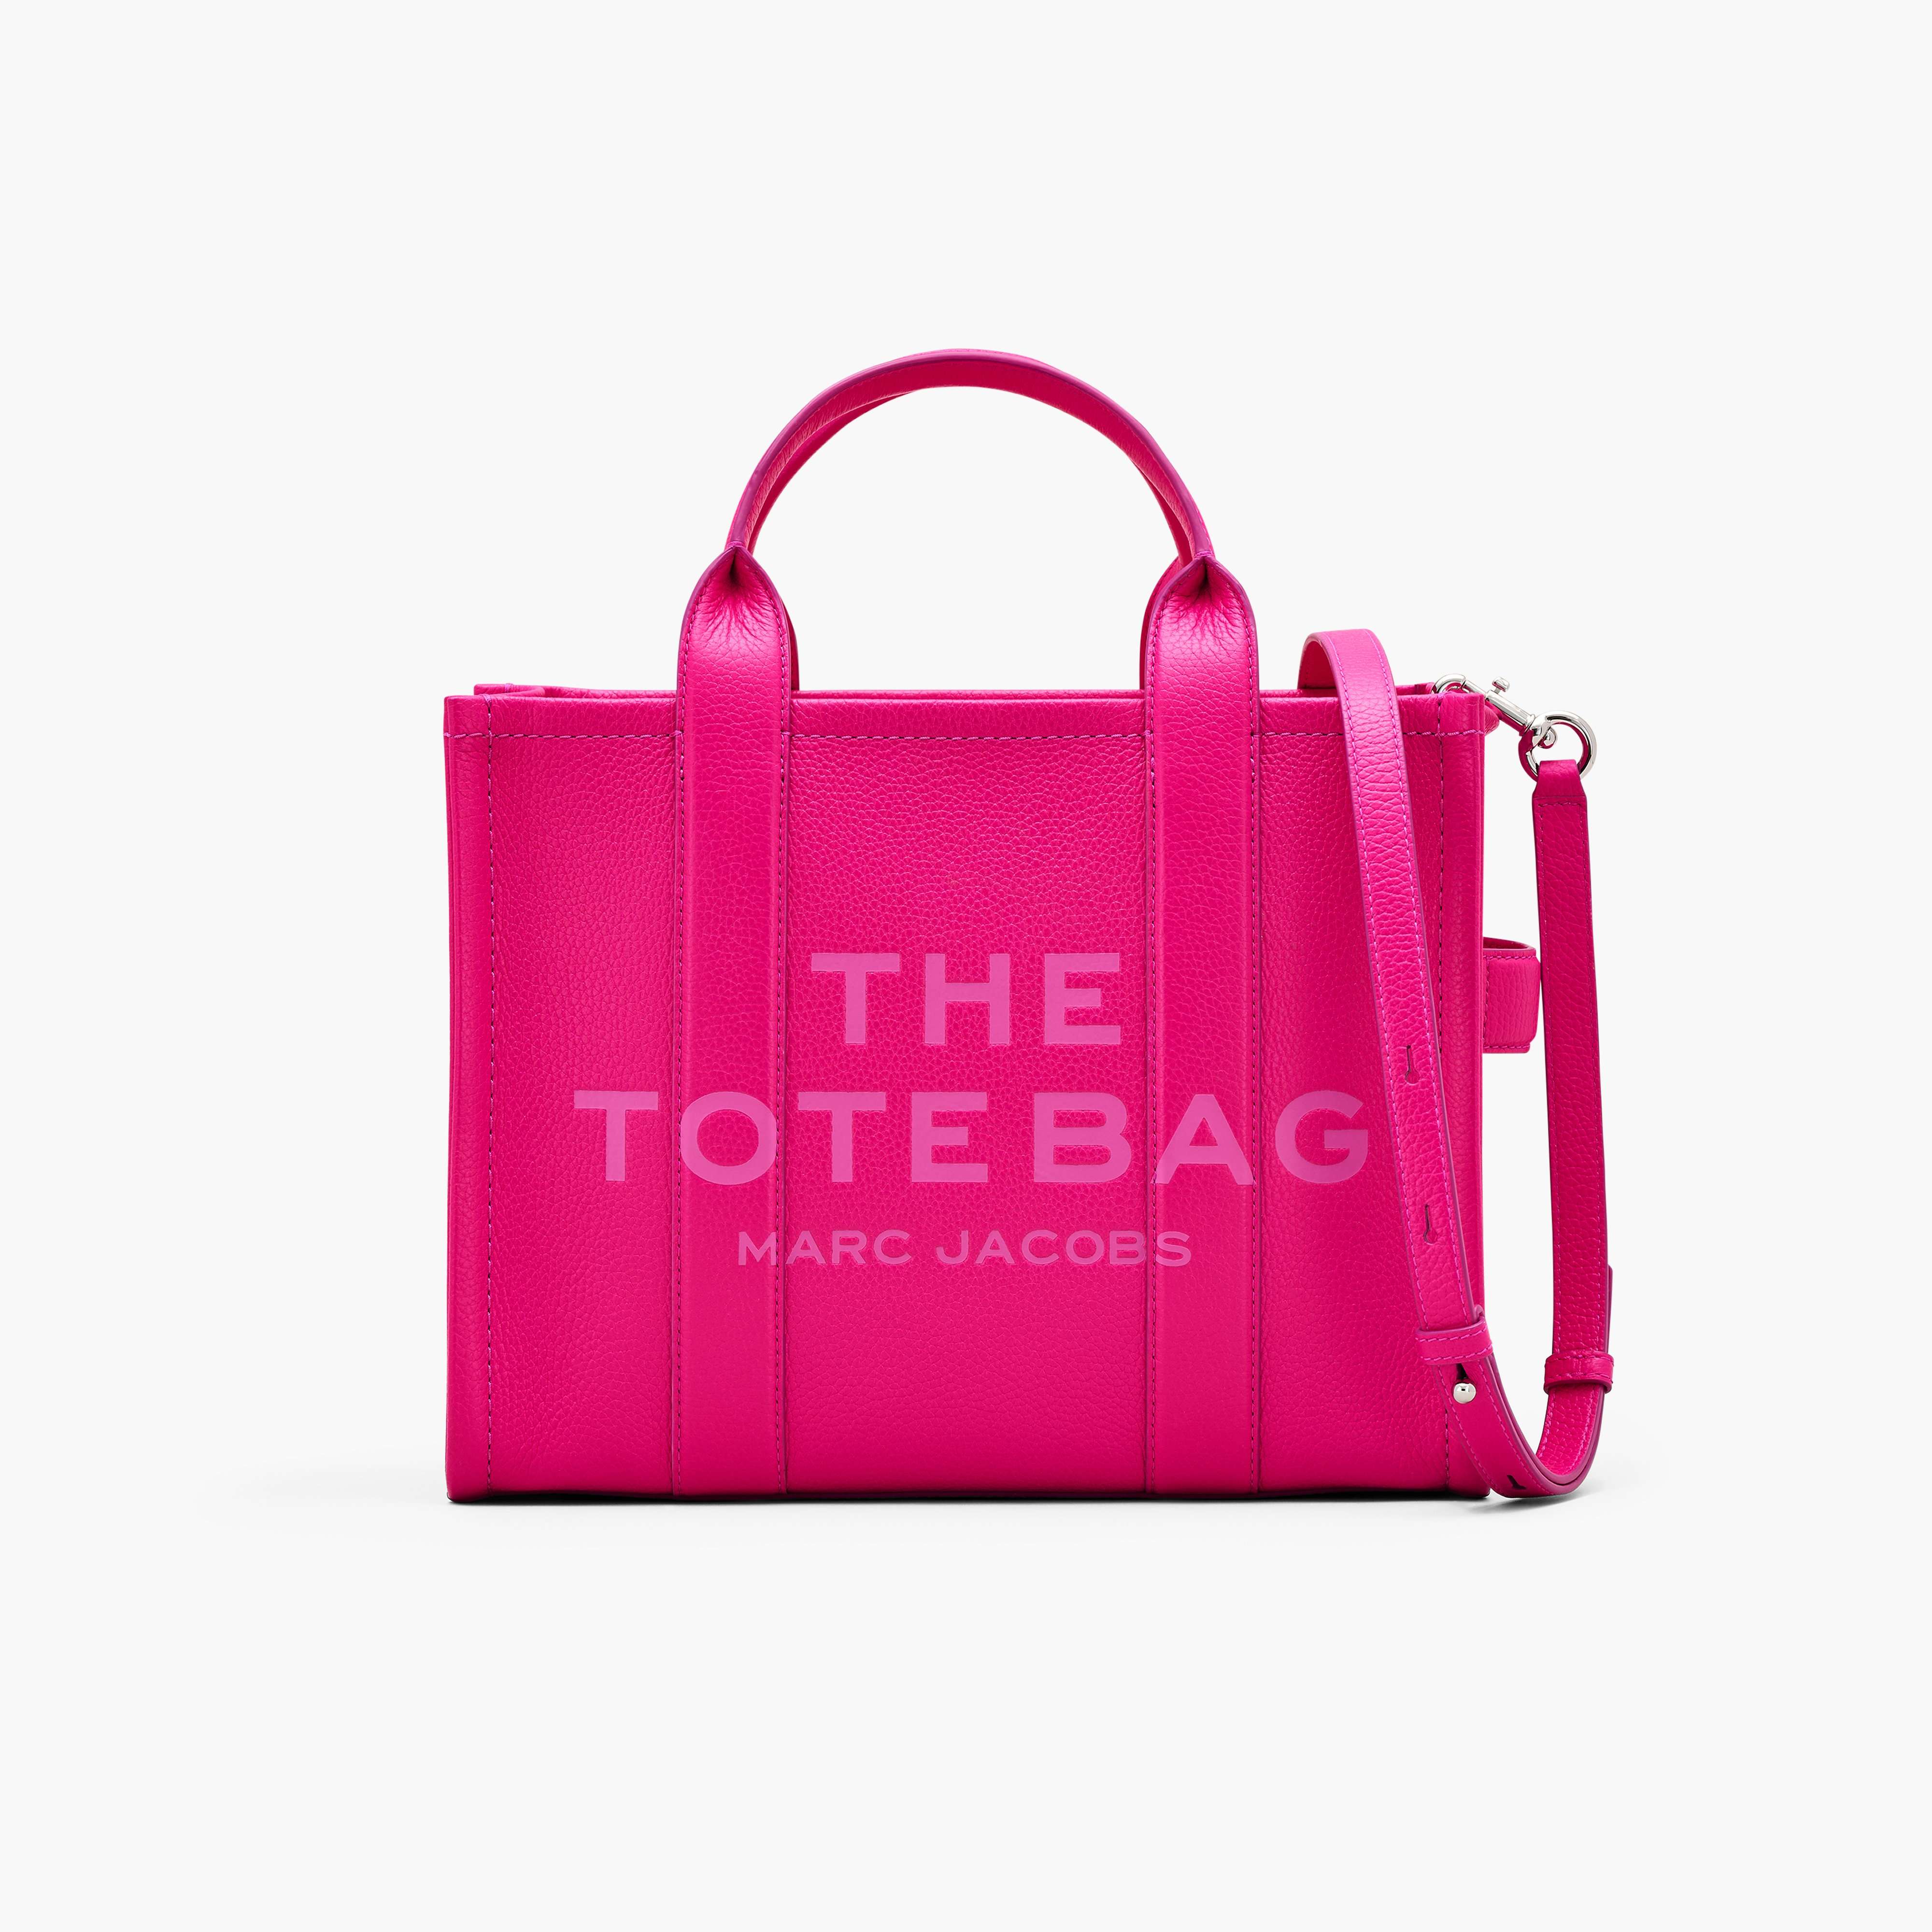 The Leather Medium Tote Bag in Hot Pink